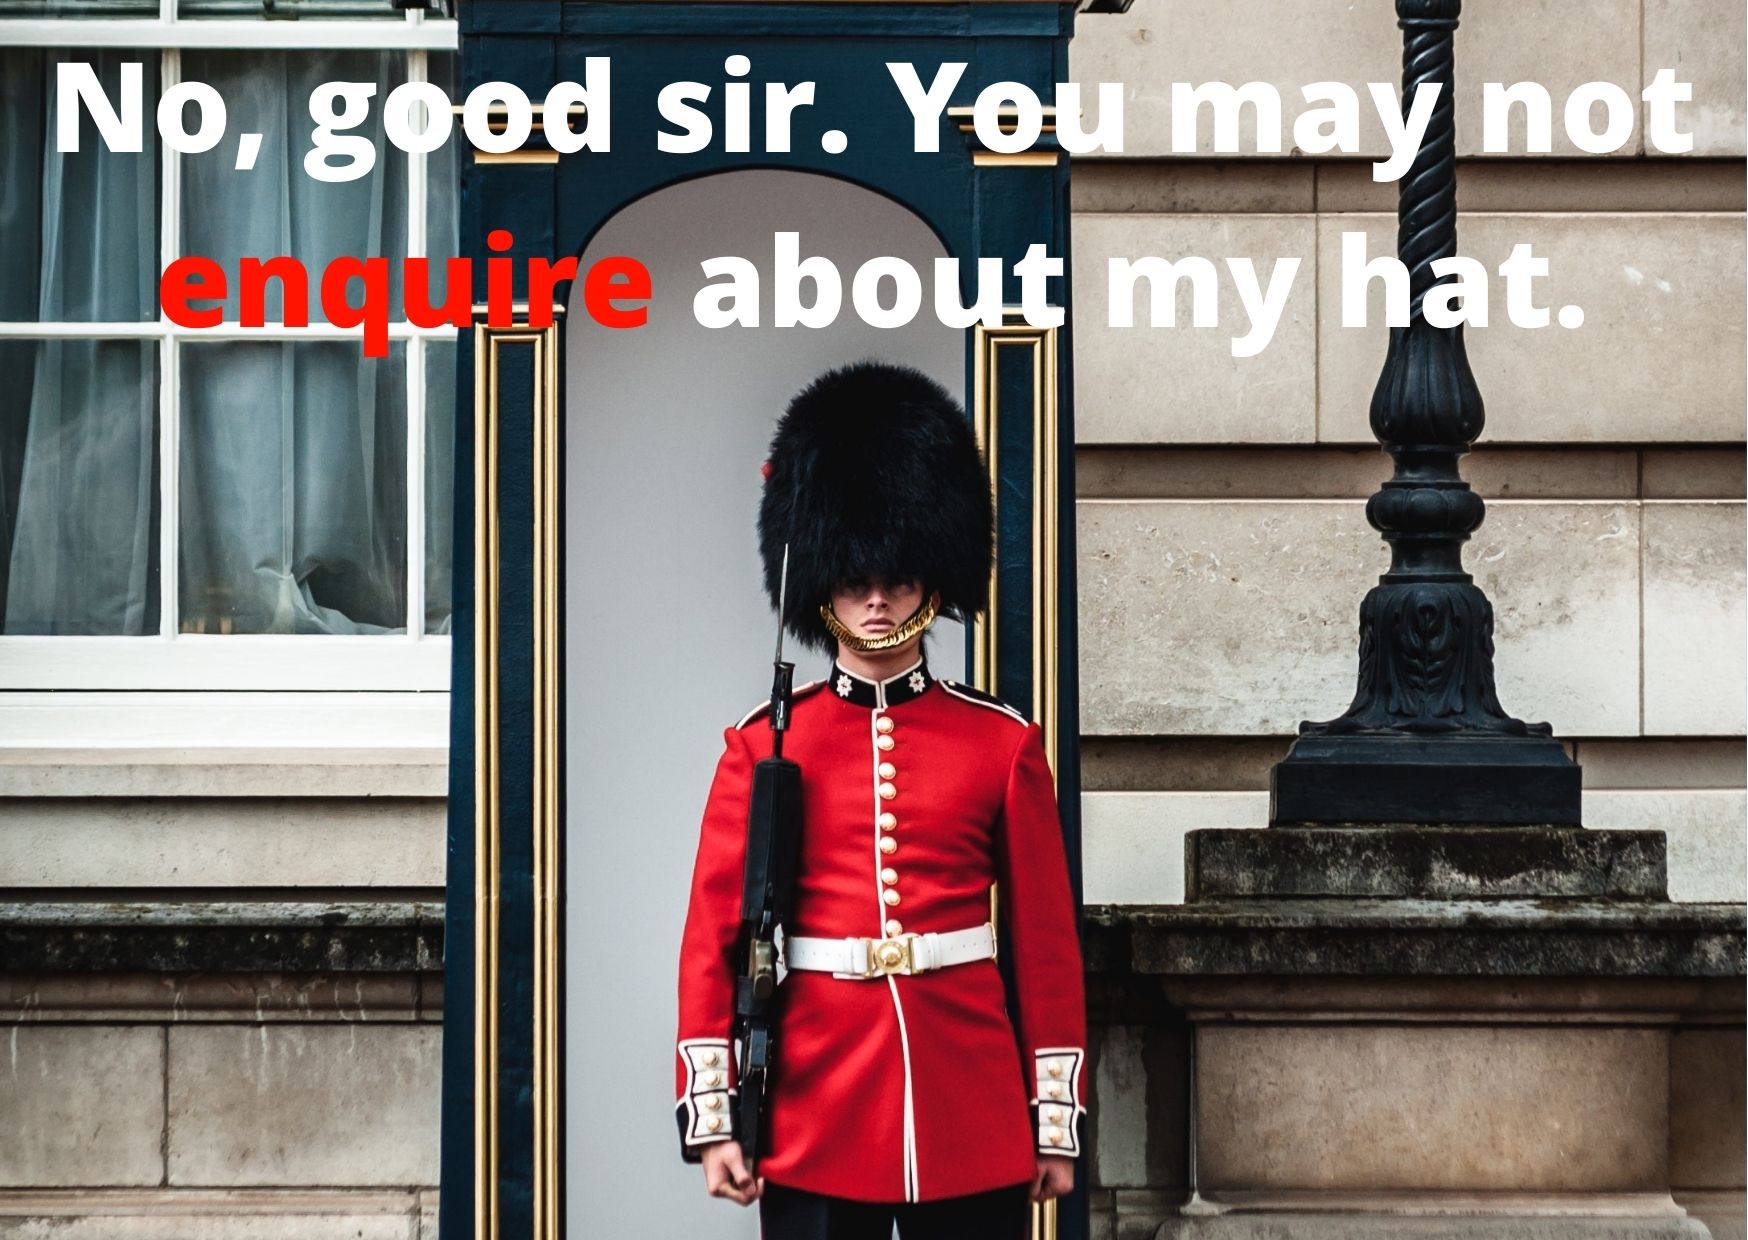 Graphic of British guard with the words "No, good sir. You may not enquire about my hat"